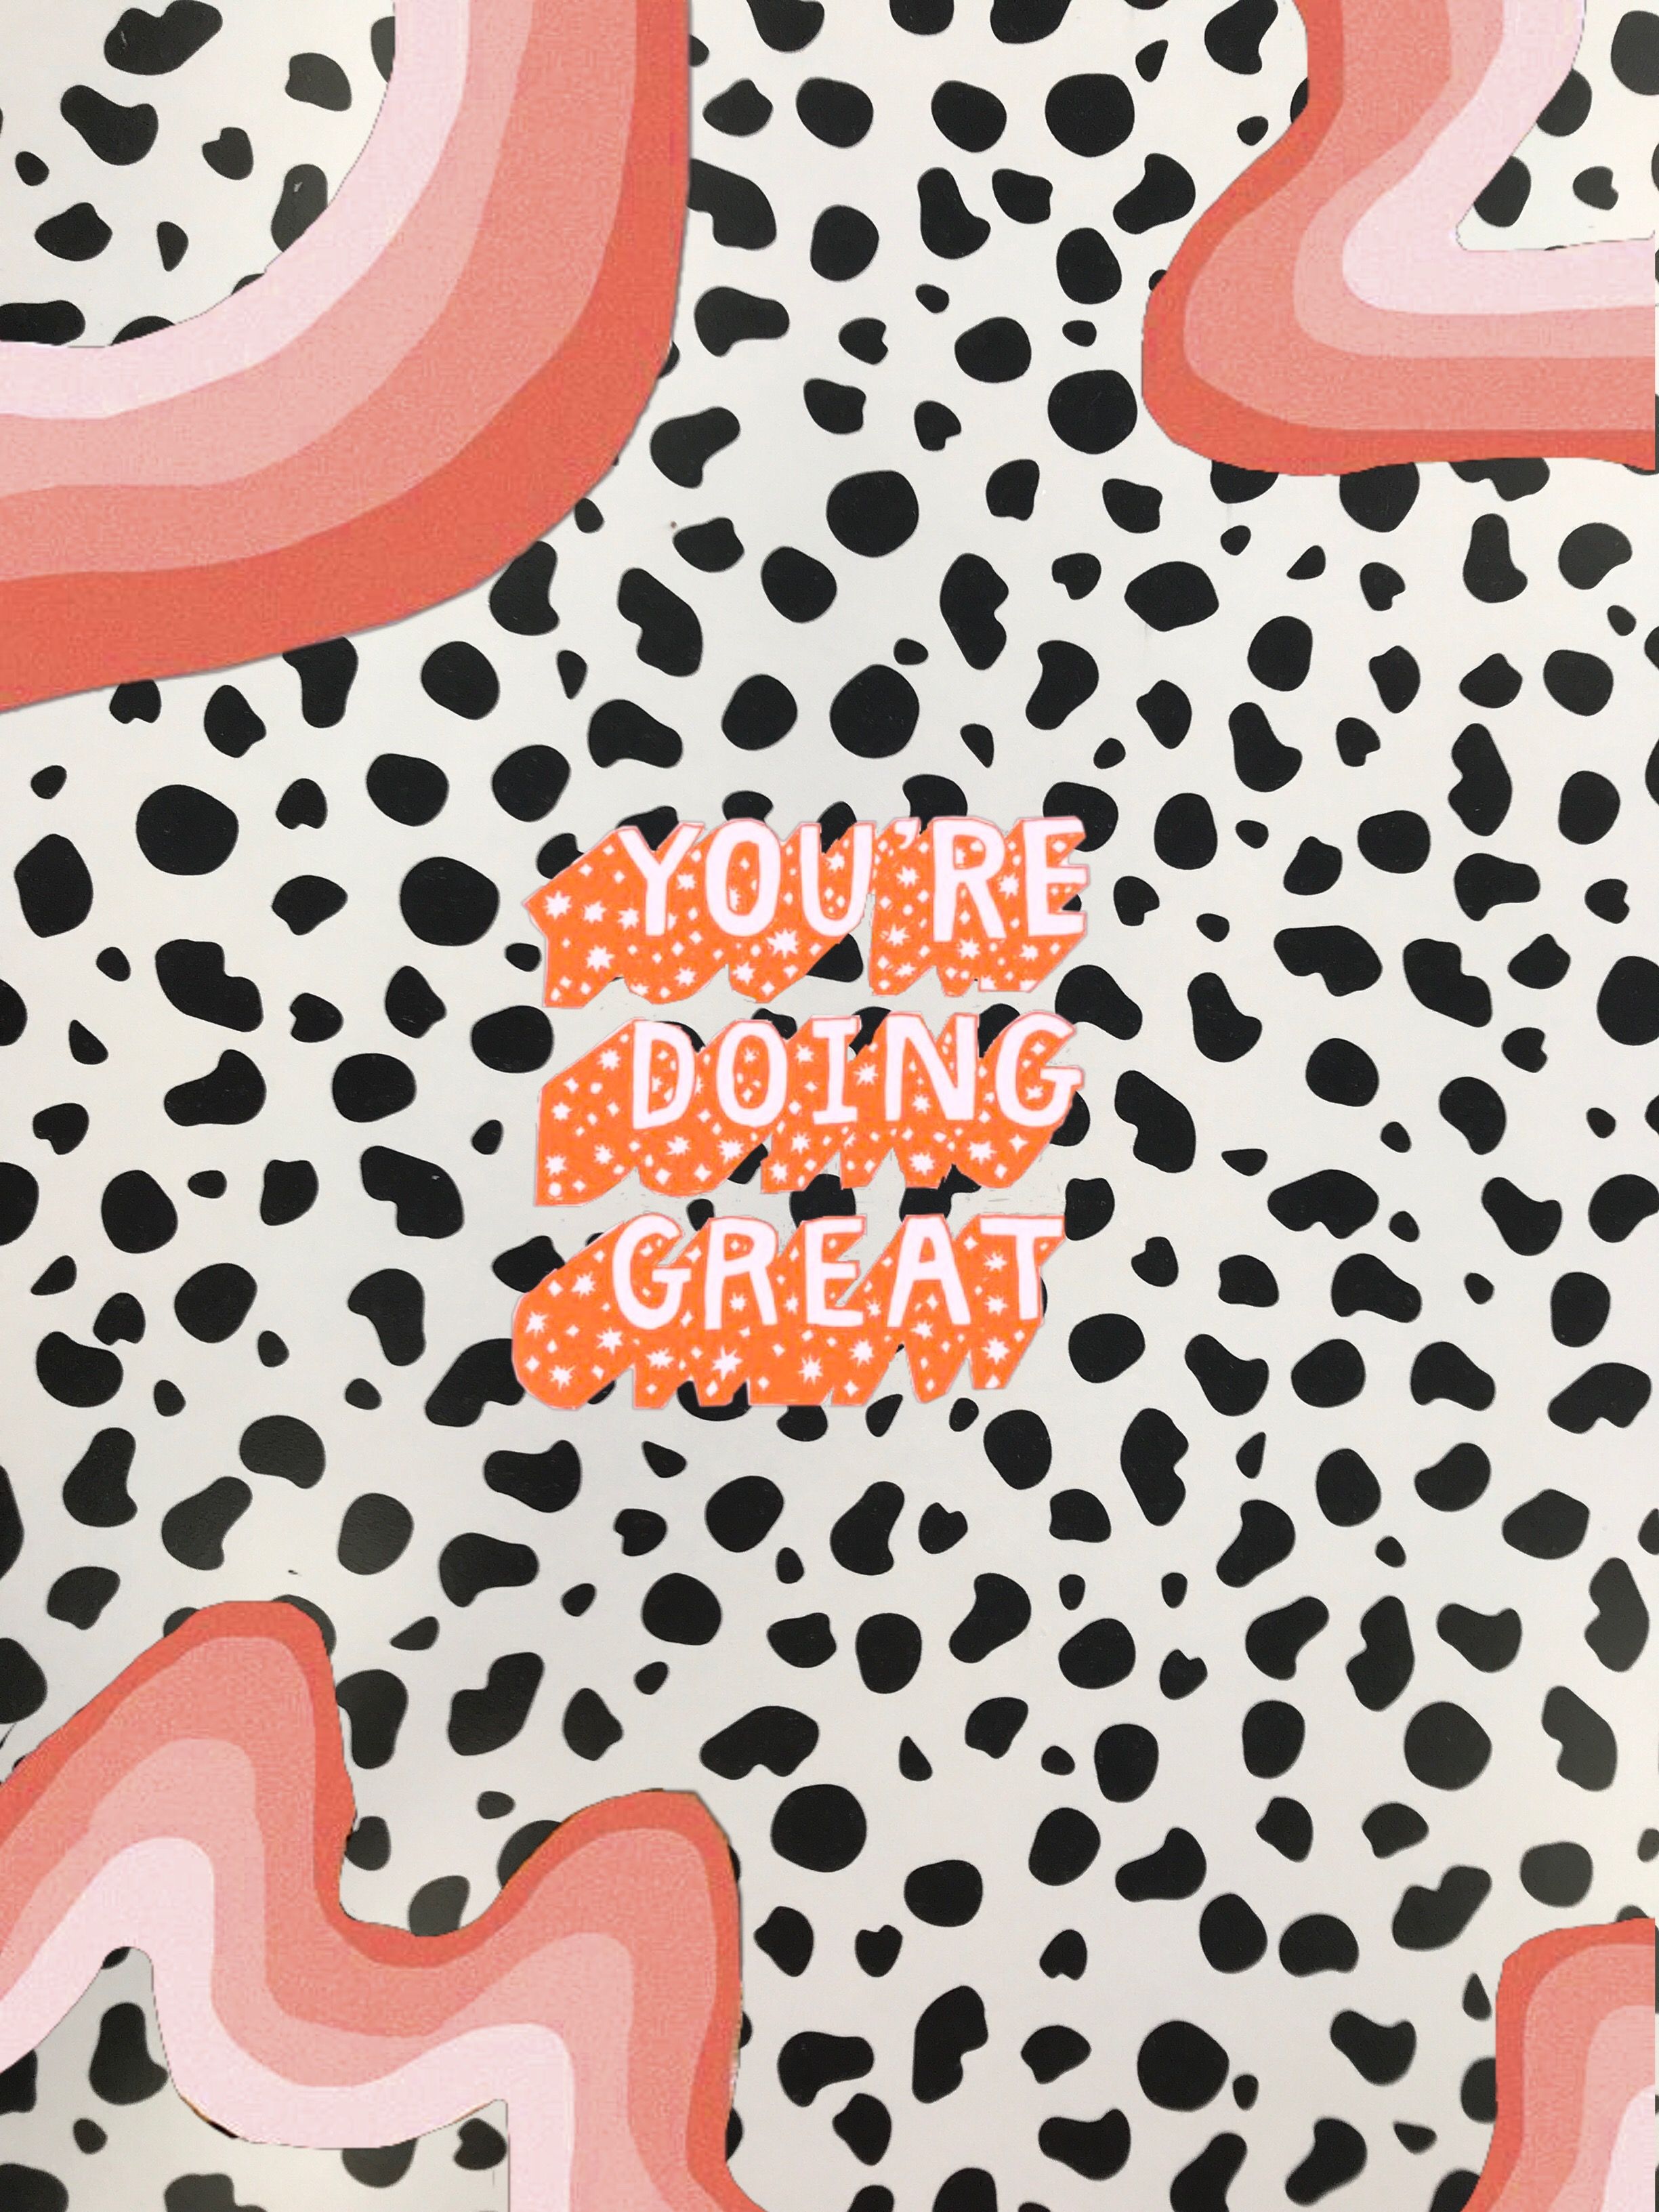 A black and white spotted background with coral and black squiggles. Text in coral reads 